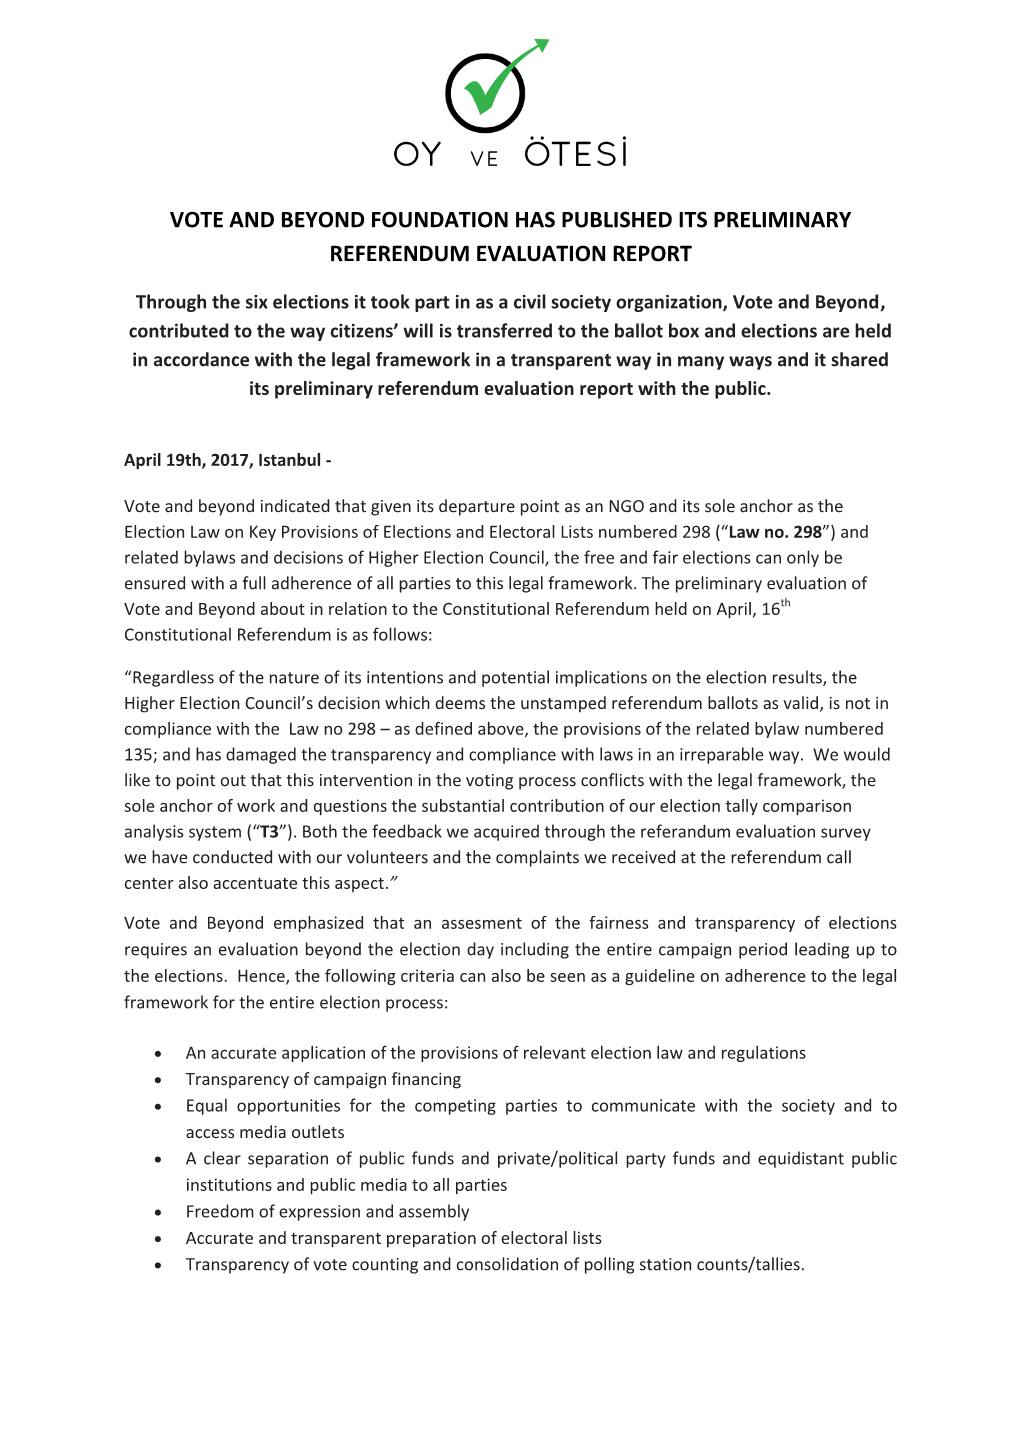 Vote and Beyond Foundation Has Published Its Preliminary Referendum Evaluation Report